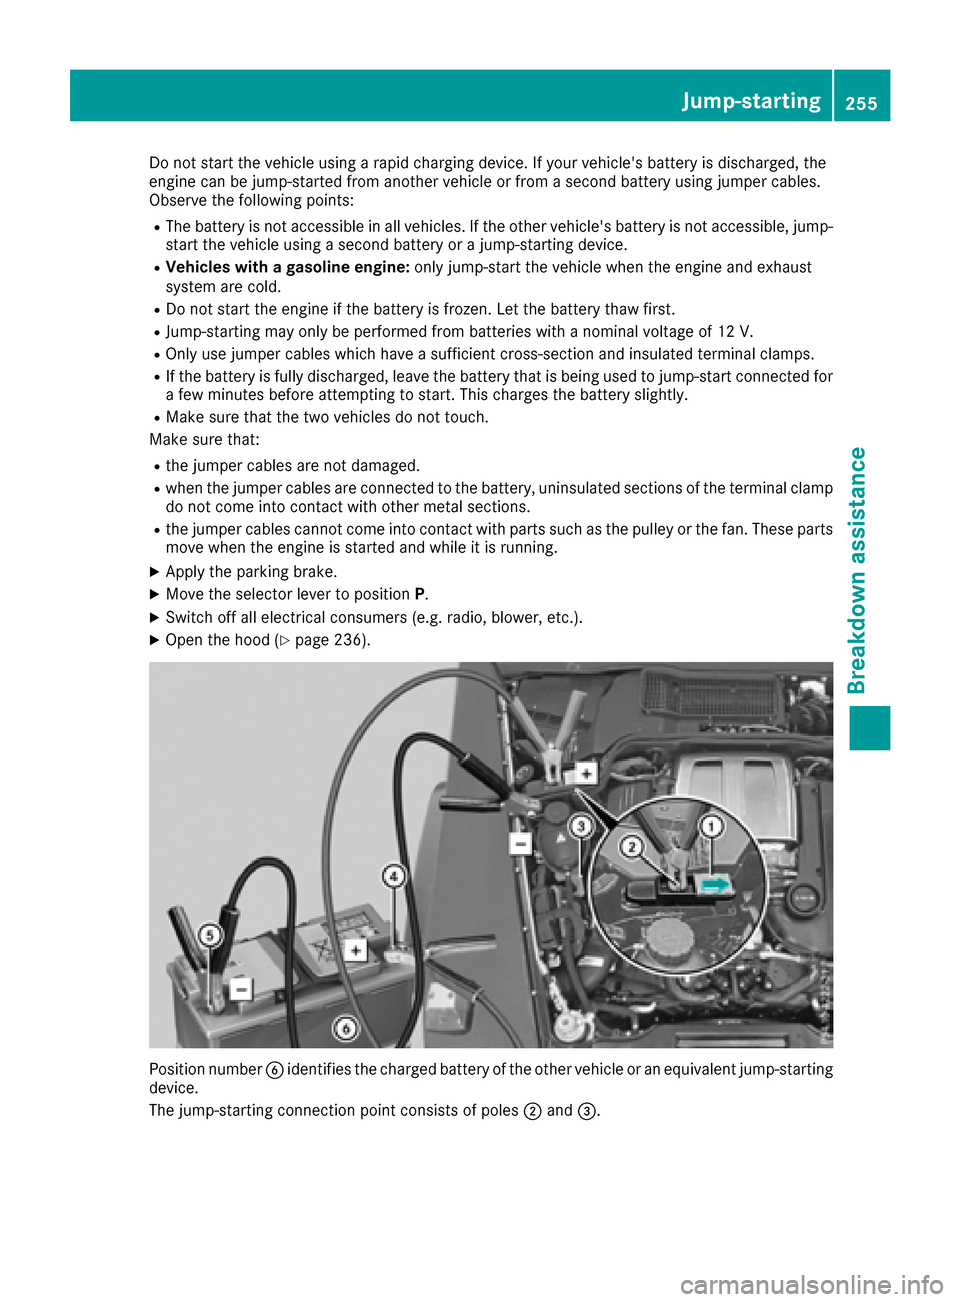 MERCEDES-BENZ G-Class 2016 W463 Owners Manual Do not start the vehicle using a rapid charging device. If your vehicles battery is discharged, the
engine can be jump-started from another vehicle or from a second battery using jumper cables.
Obser